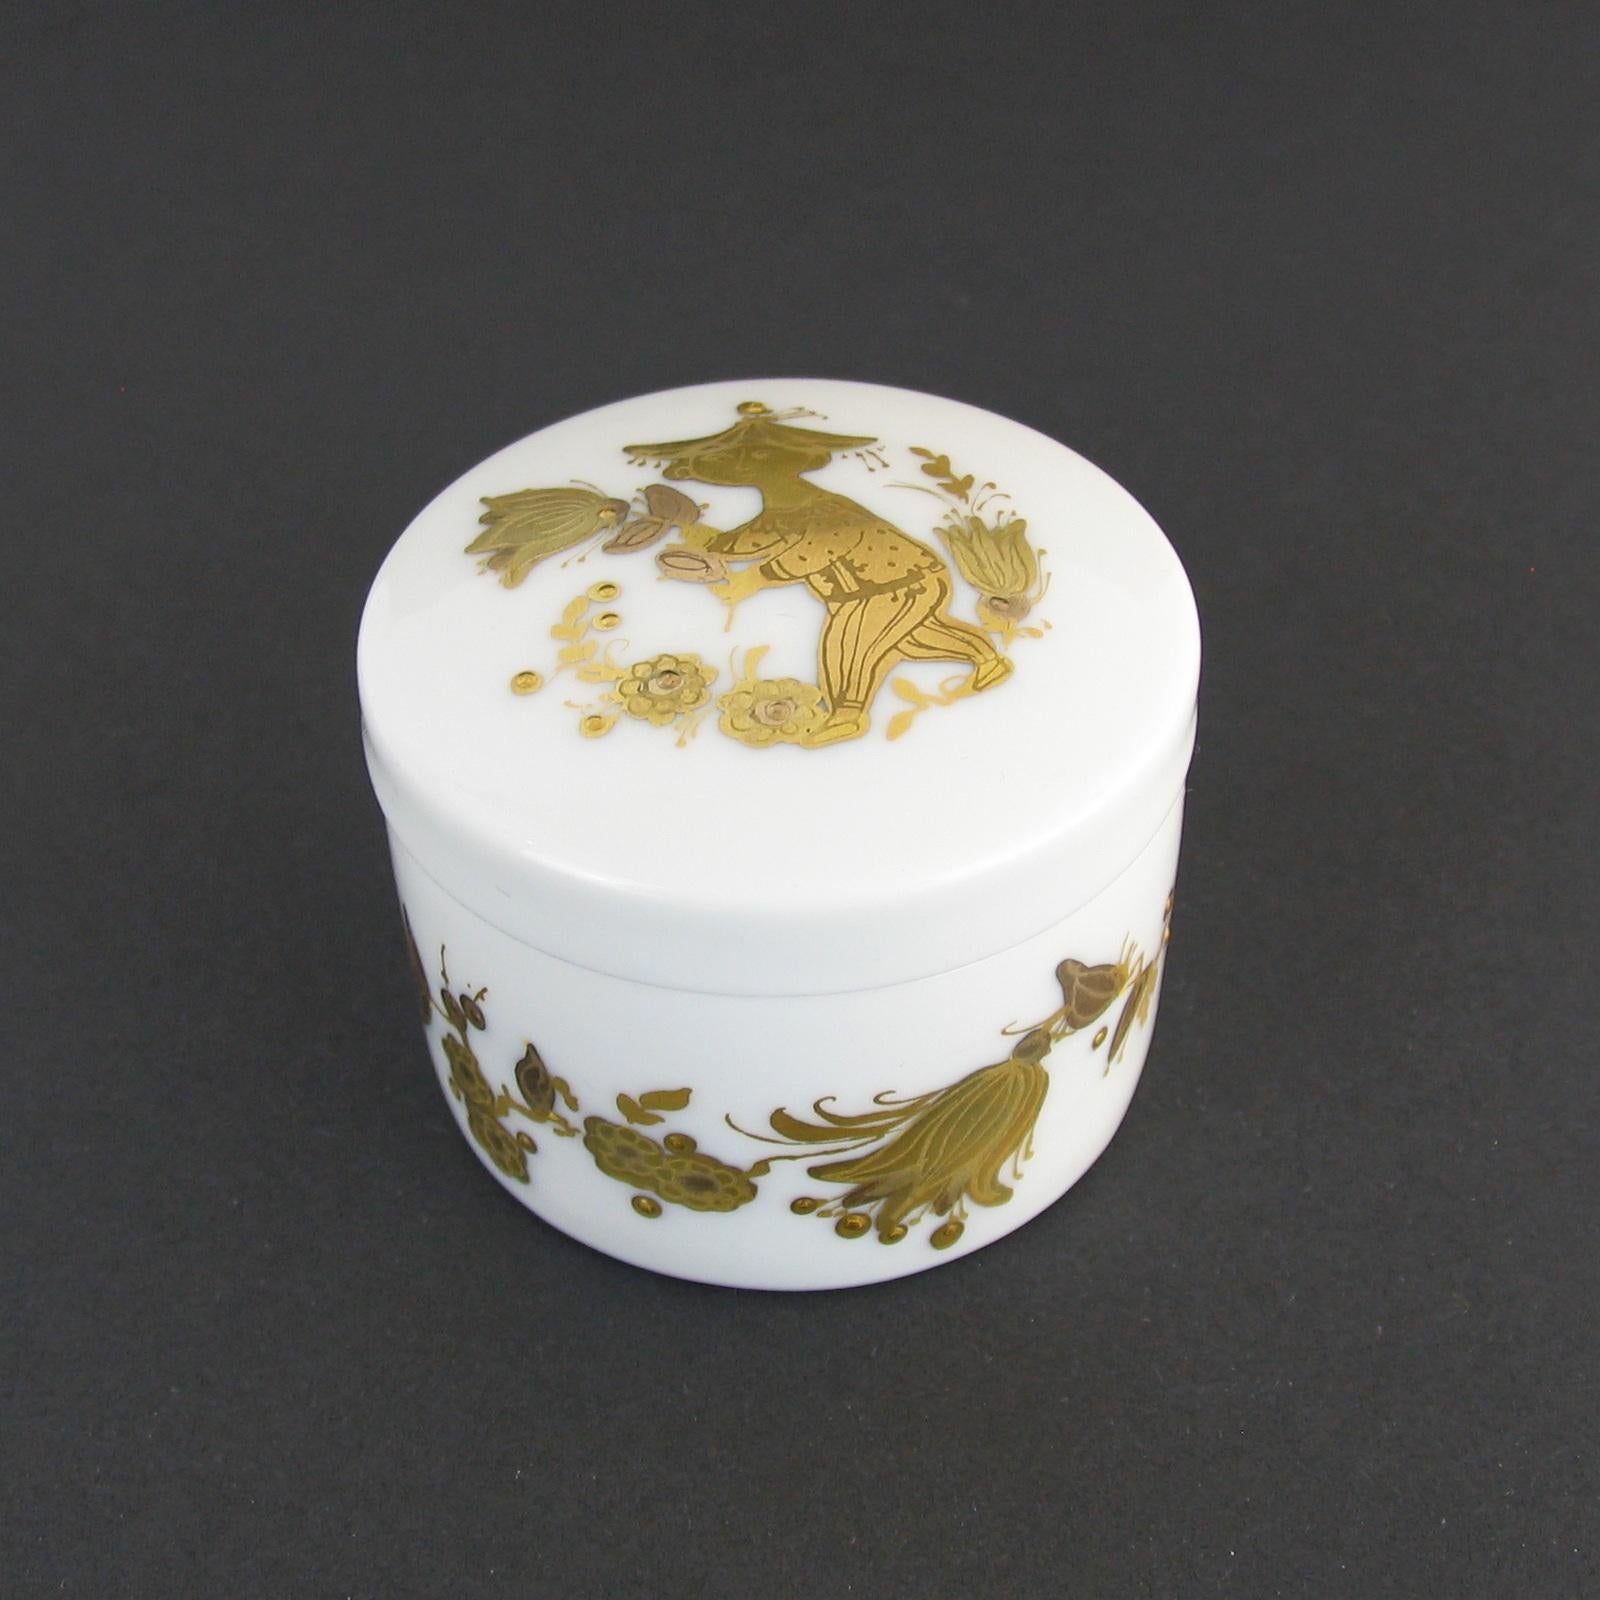 Bjorn Wiinblad Porcelain box, Quatre Couleurs, designed for Rosenthal, Germany, 1981
A white porcelain lidded box, decorated with a liquid gold painted motif, in four shades of gold. Makers marks under the bottom. In excellent